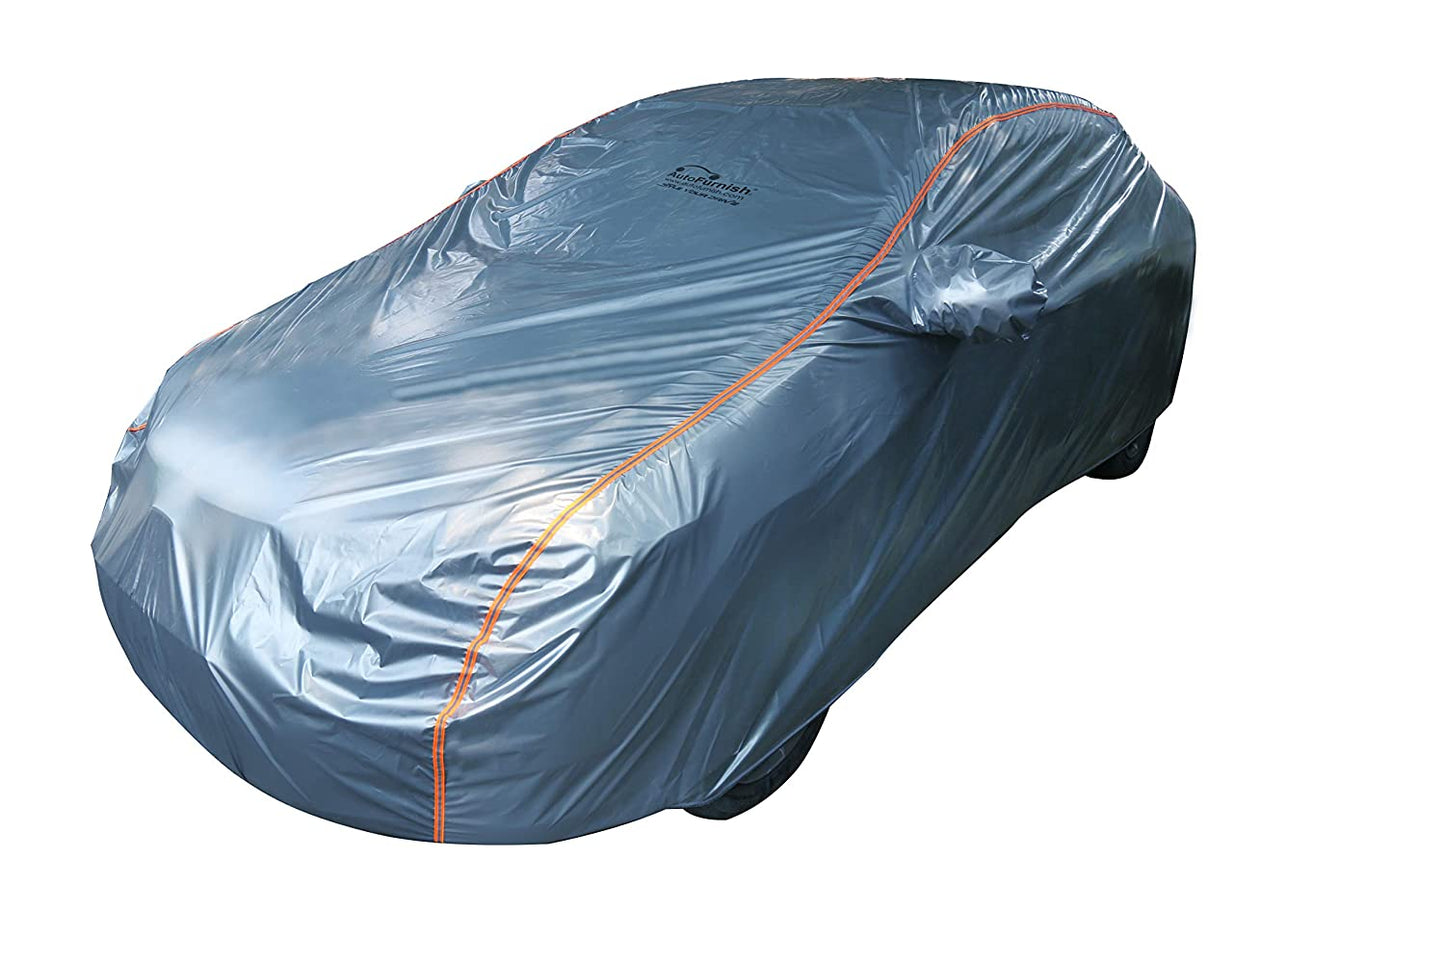 Jaguar XE 2018 Waterproof Car Cover, All Weather Proof, Premium & Long Lasting Fabric with Side Mirror Pocket (ACHO Series)